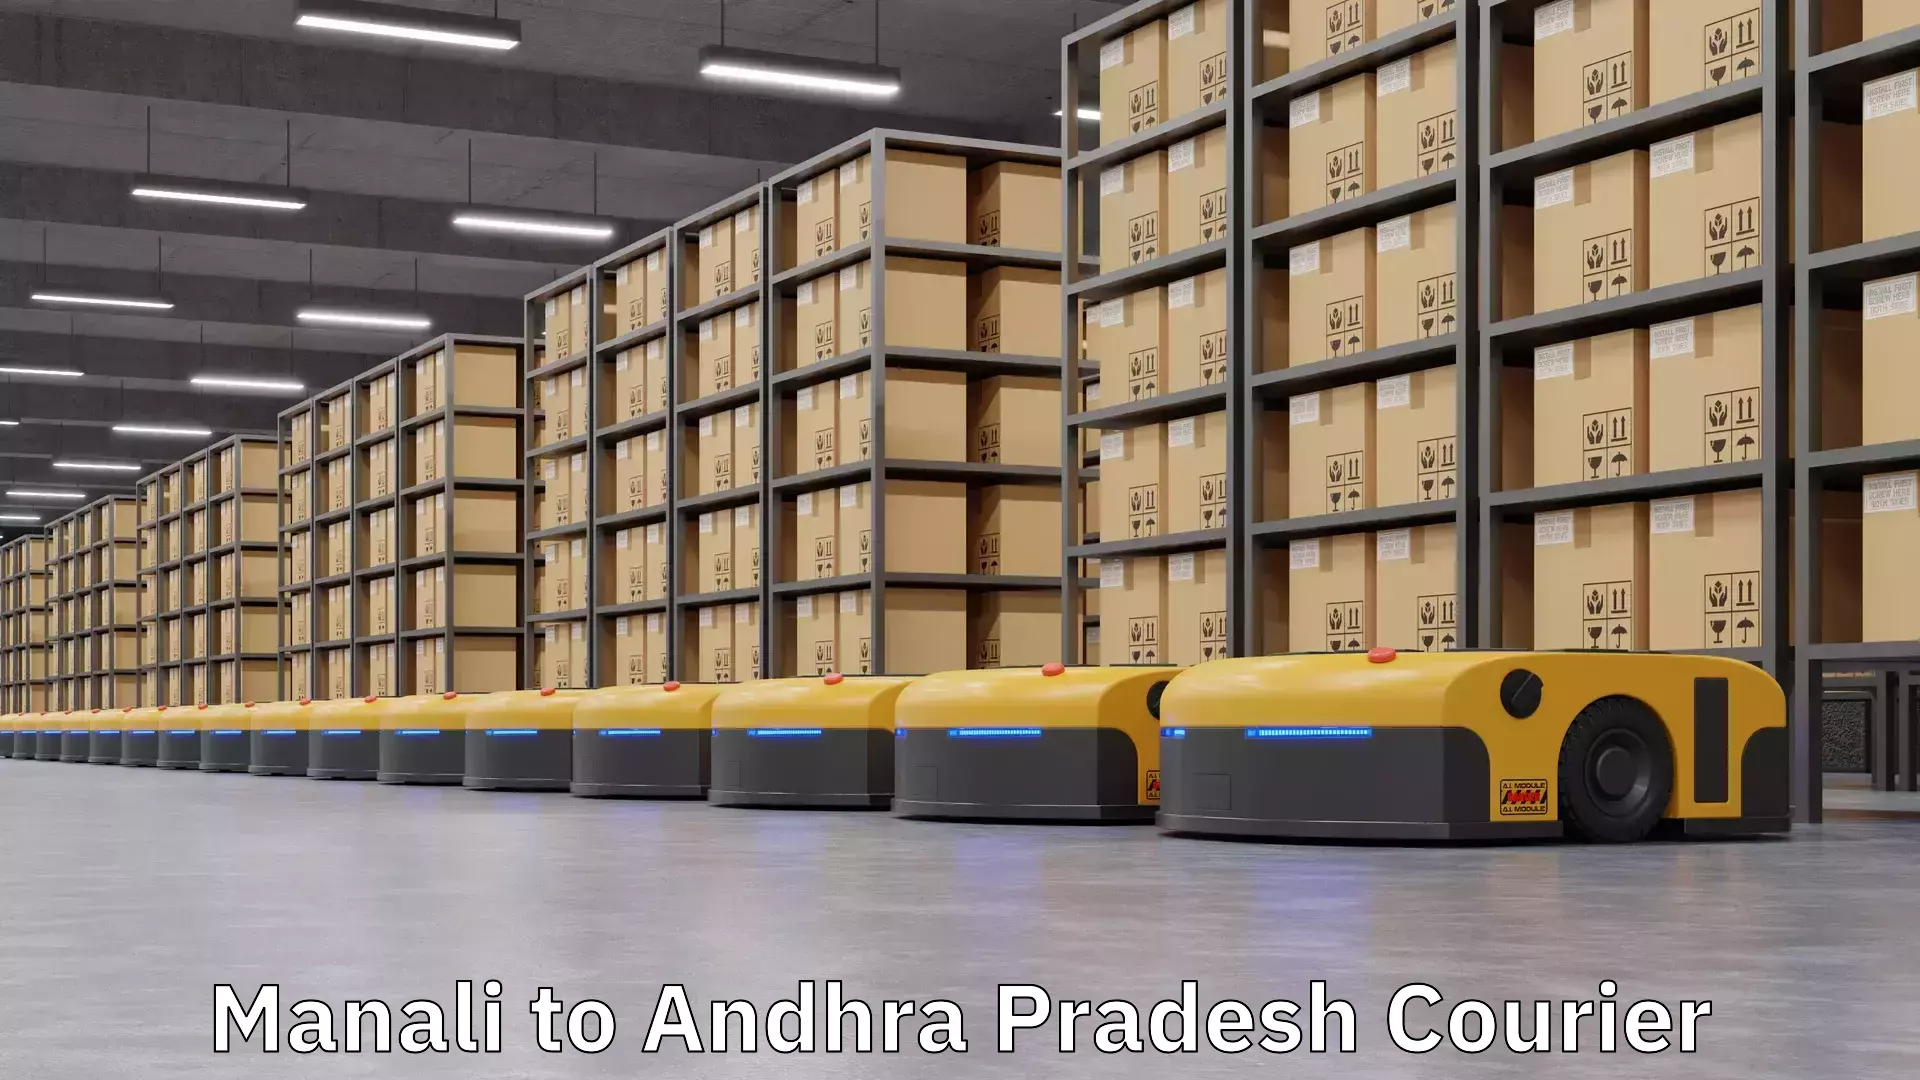 On-demand courier Manali to Andhra Pradesh